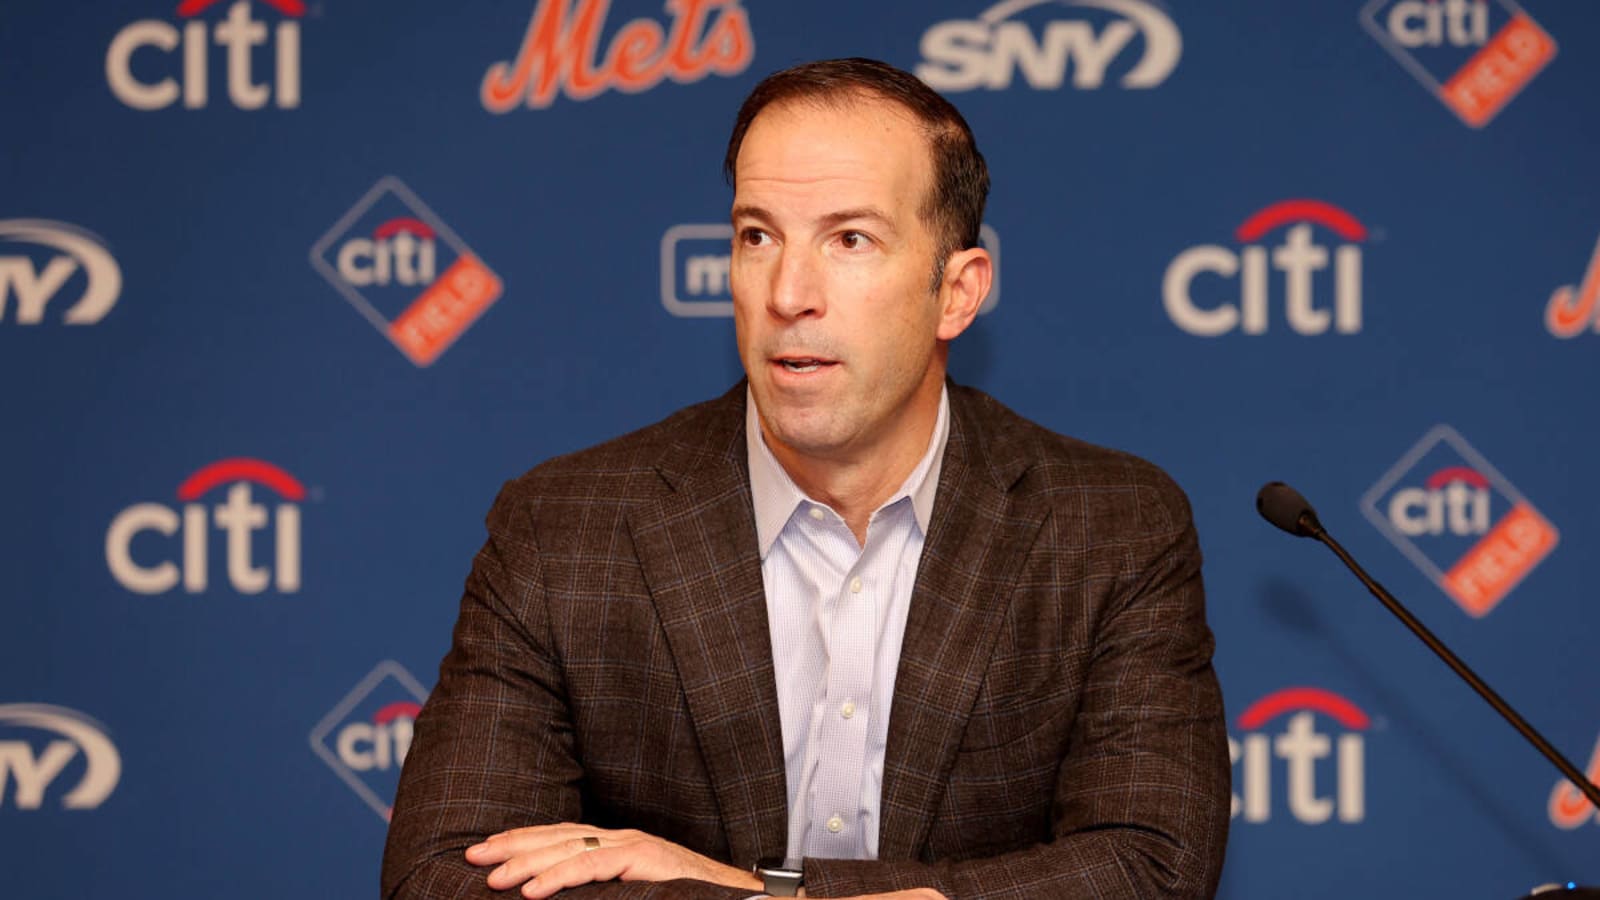 Mets Employee Assisted MLB in Billy Eppler Investigation